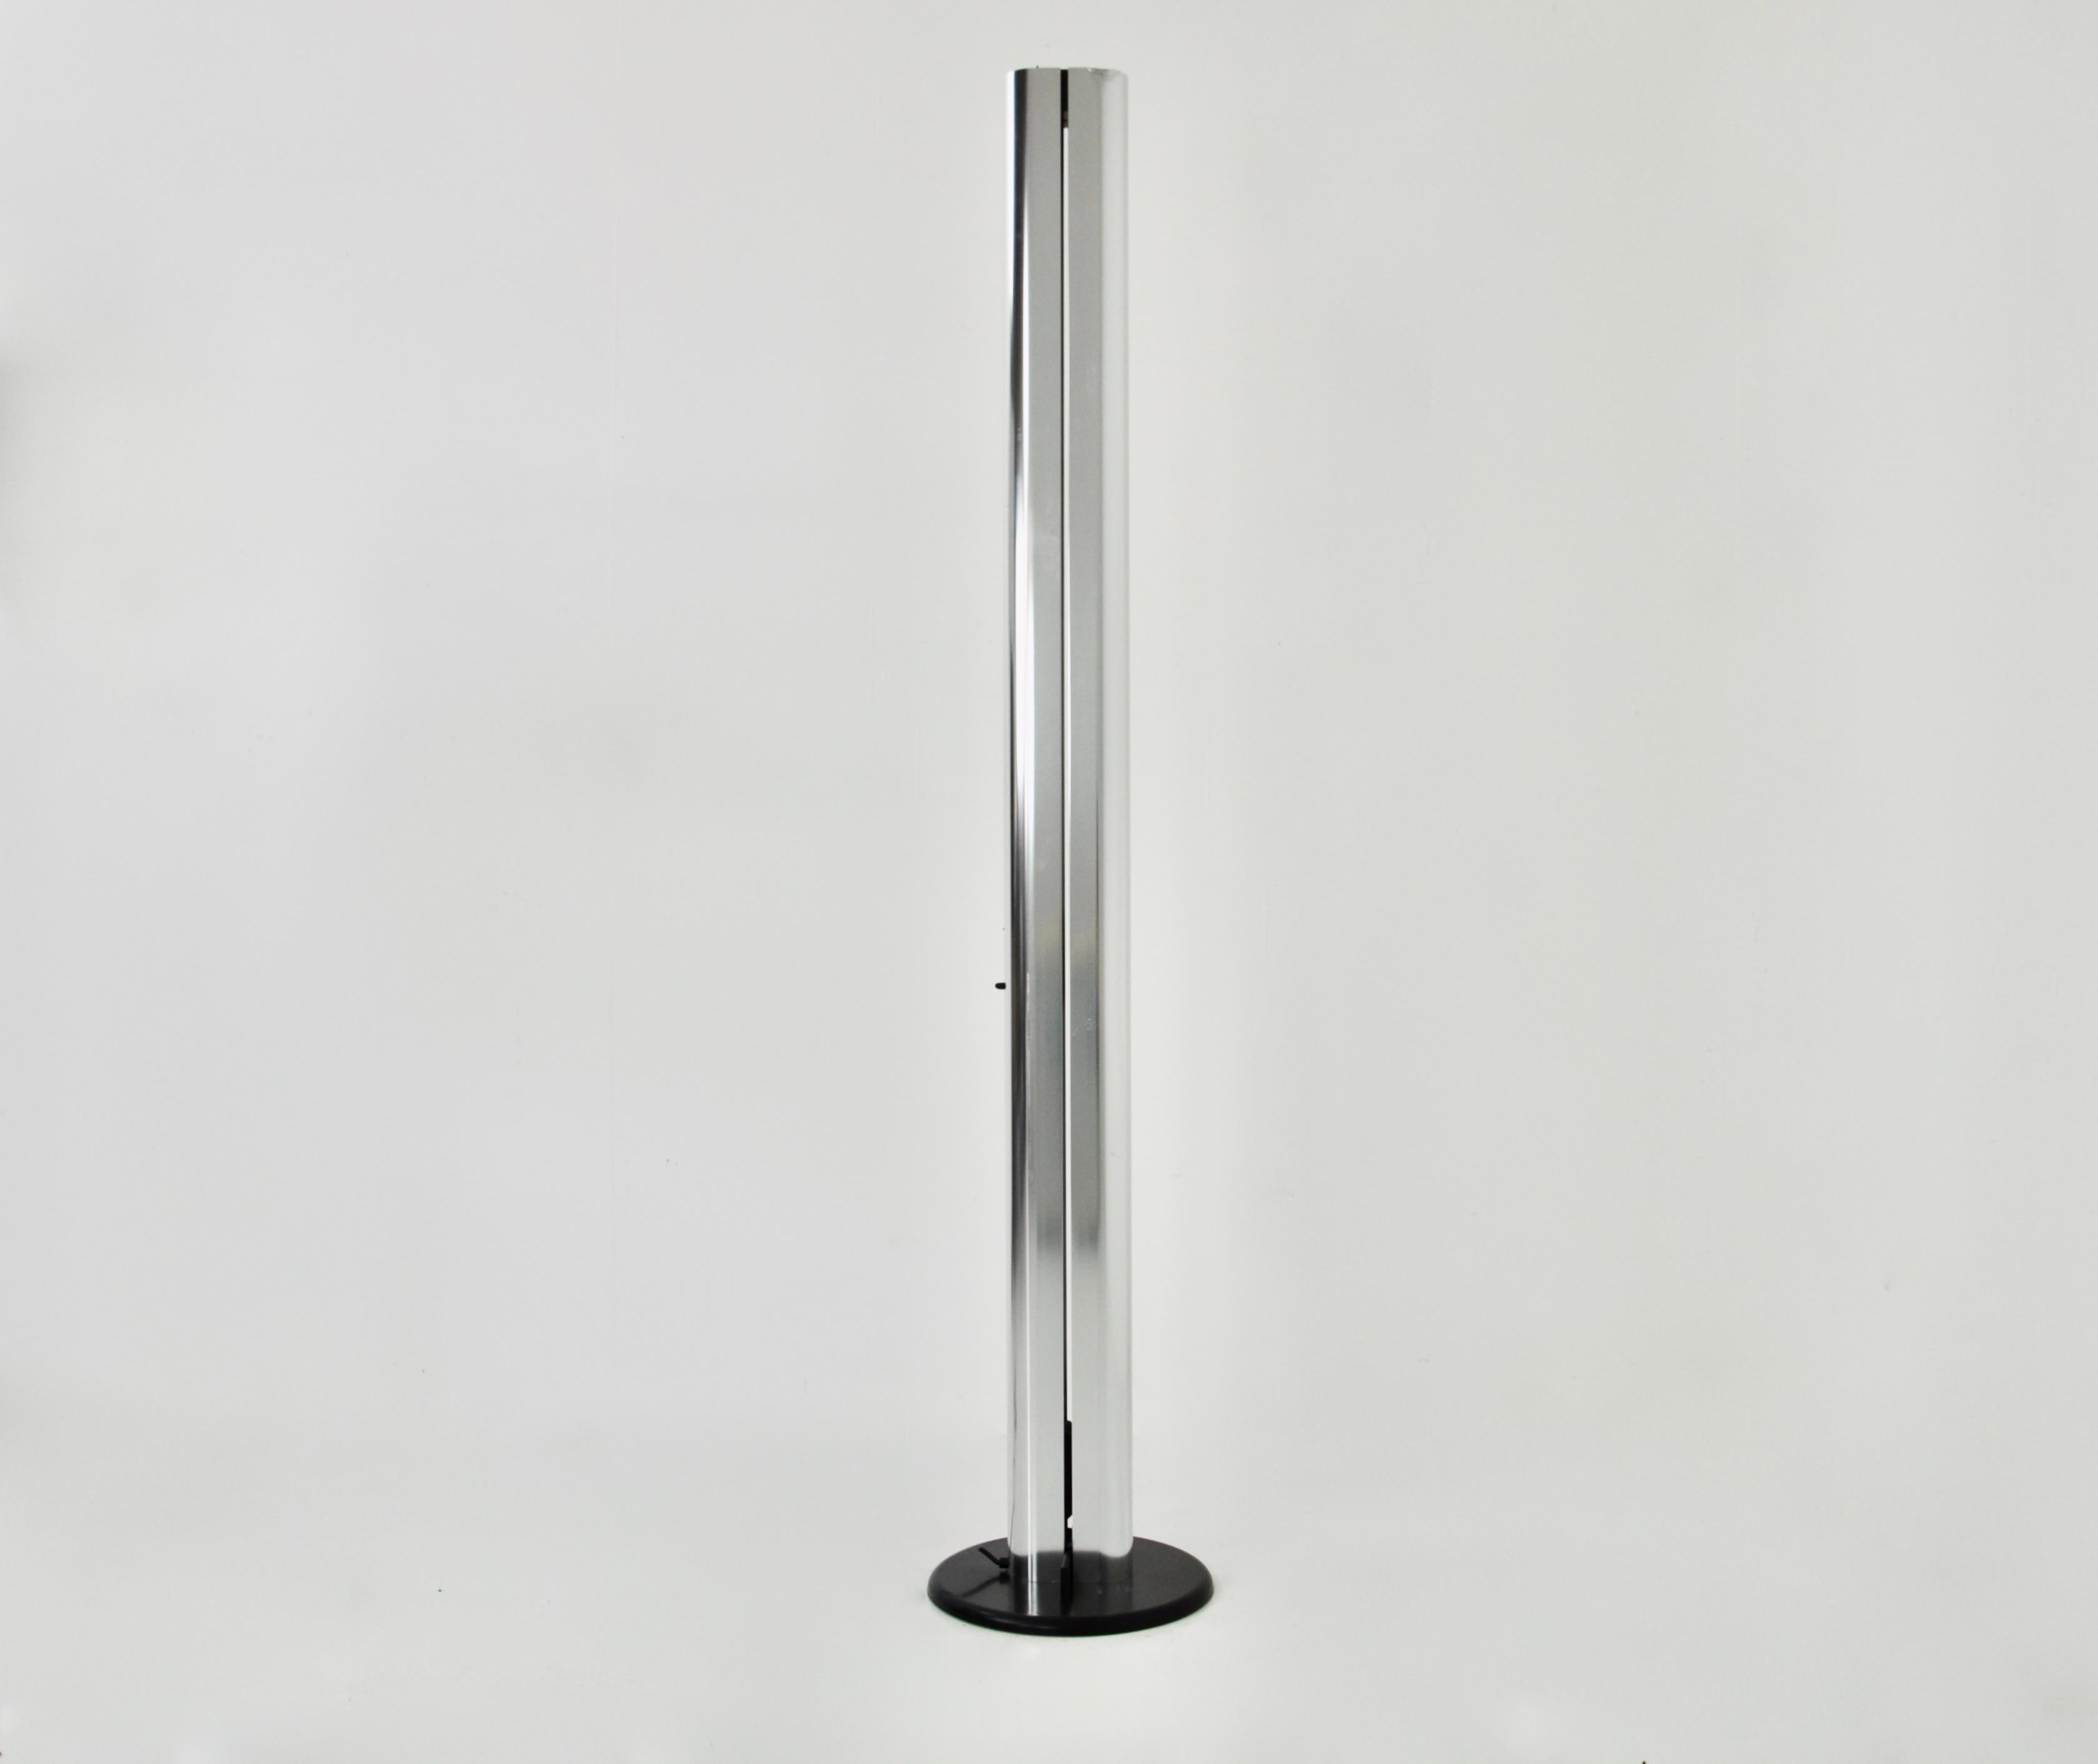 Floor lamp in chromed metal. The intensity of the light is adjustable. Stamped Artemide. Wear due to time and age of the lamp.